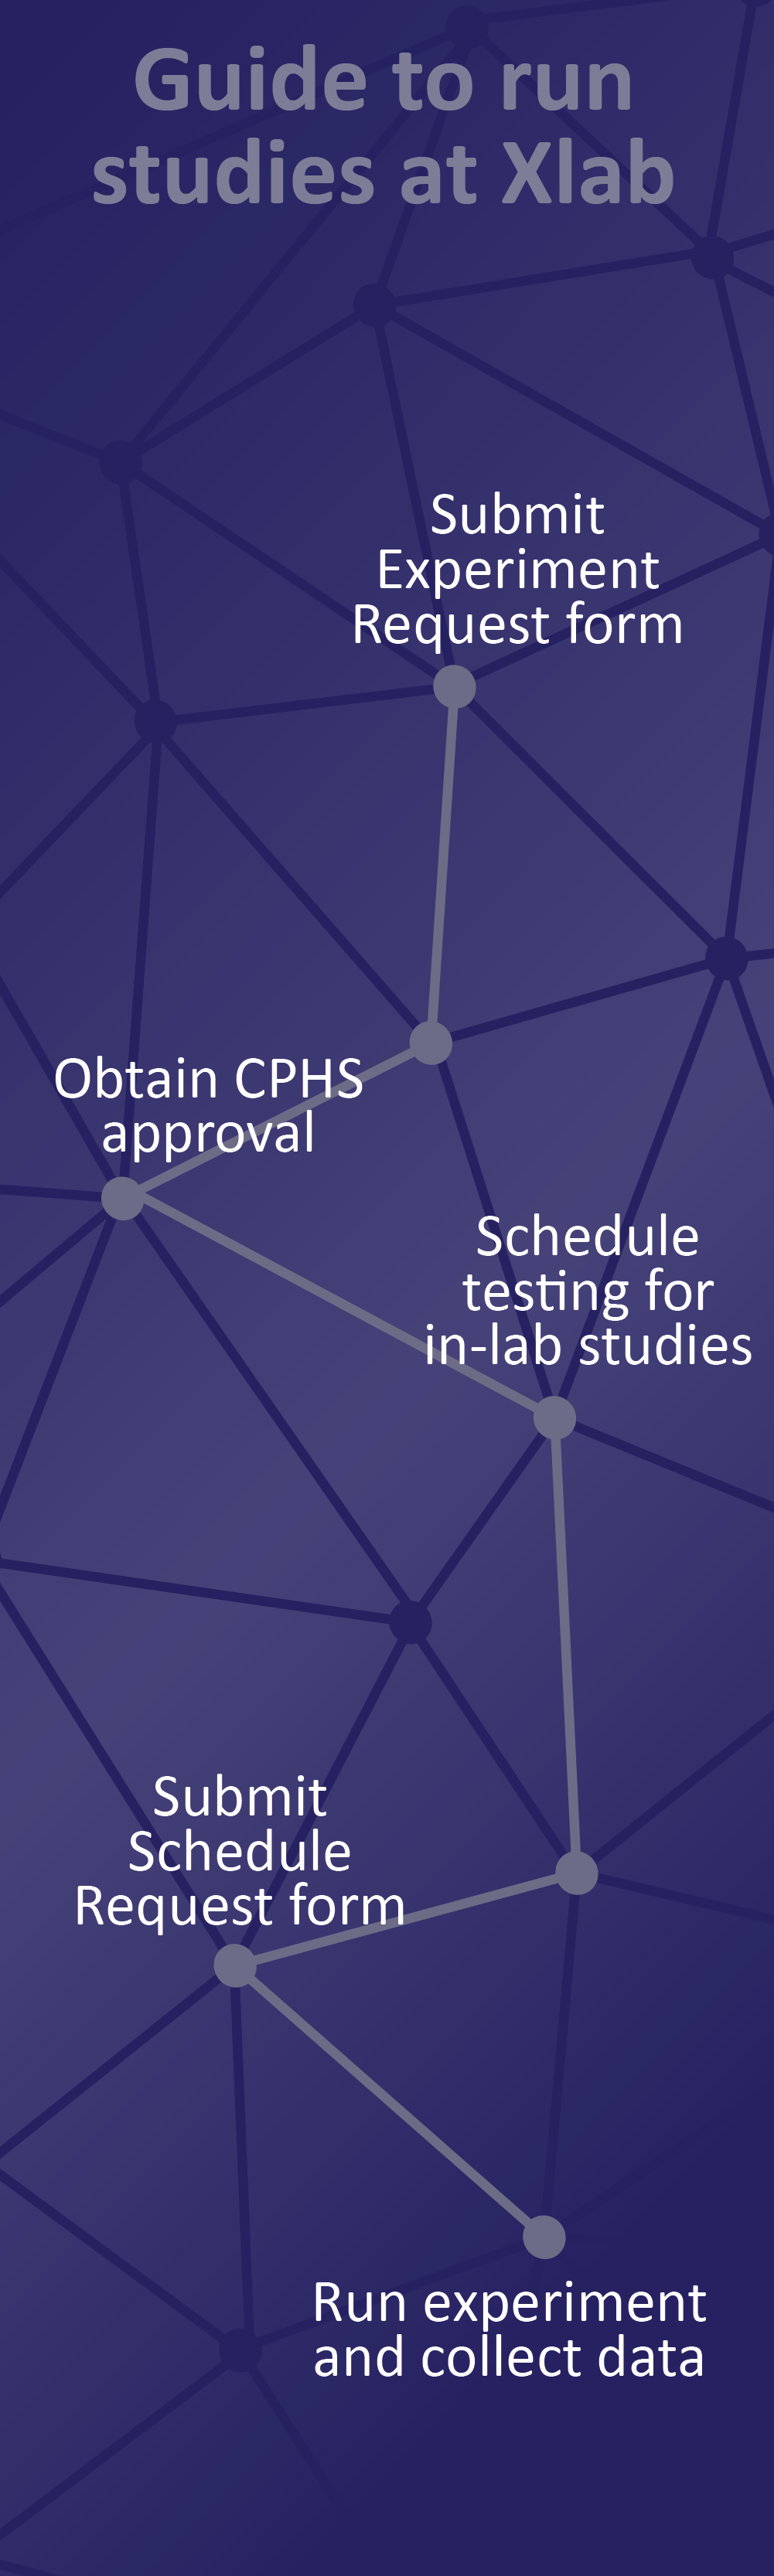 Graphic for Guide to run studies at Xlab: Submit Experiment Request form -- Obtain CPHS approval -- Schedule testing for in-lab studies -- Submit Schedule Request form -- Run experiment and collect data.